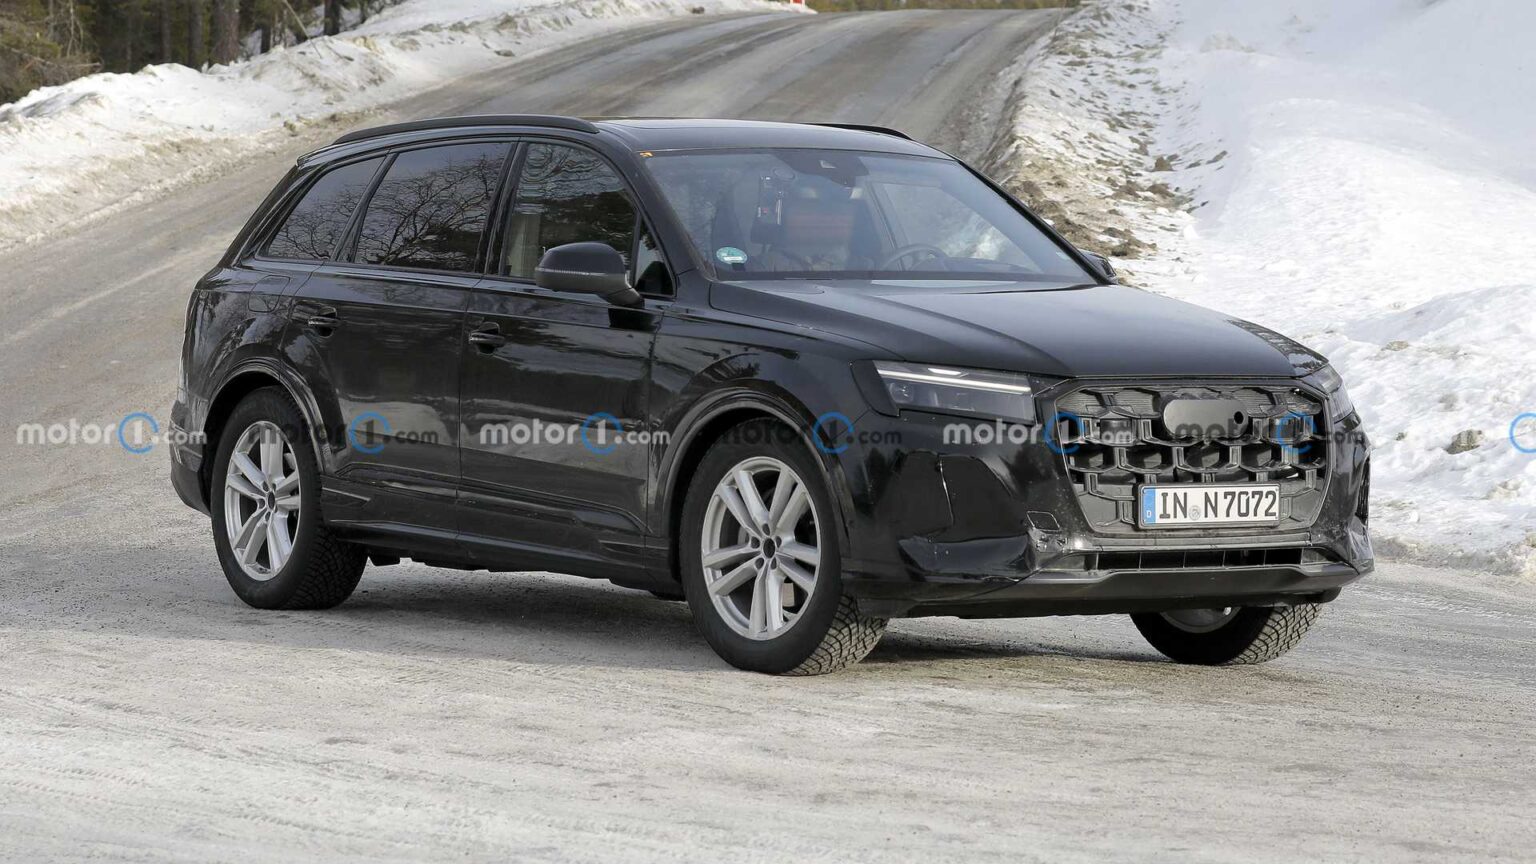 2025 Audi Q7 Another Facelift on the Way!? Best Gas Mileage SUVs